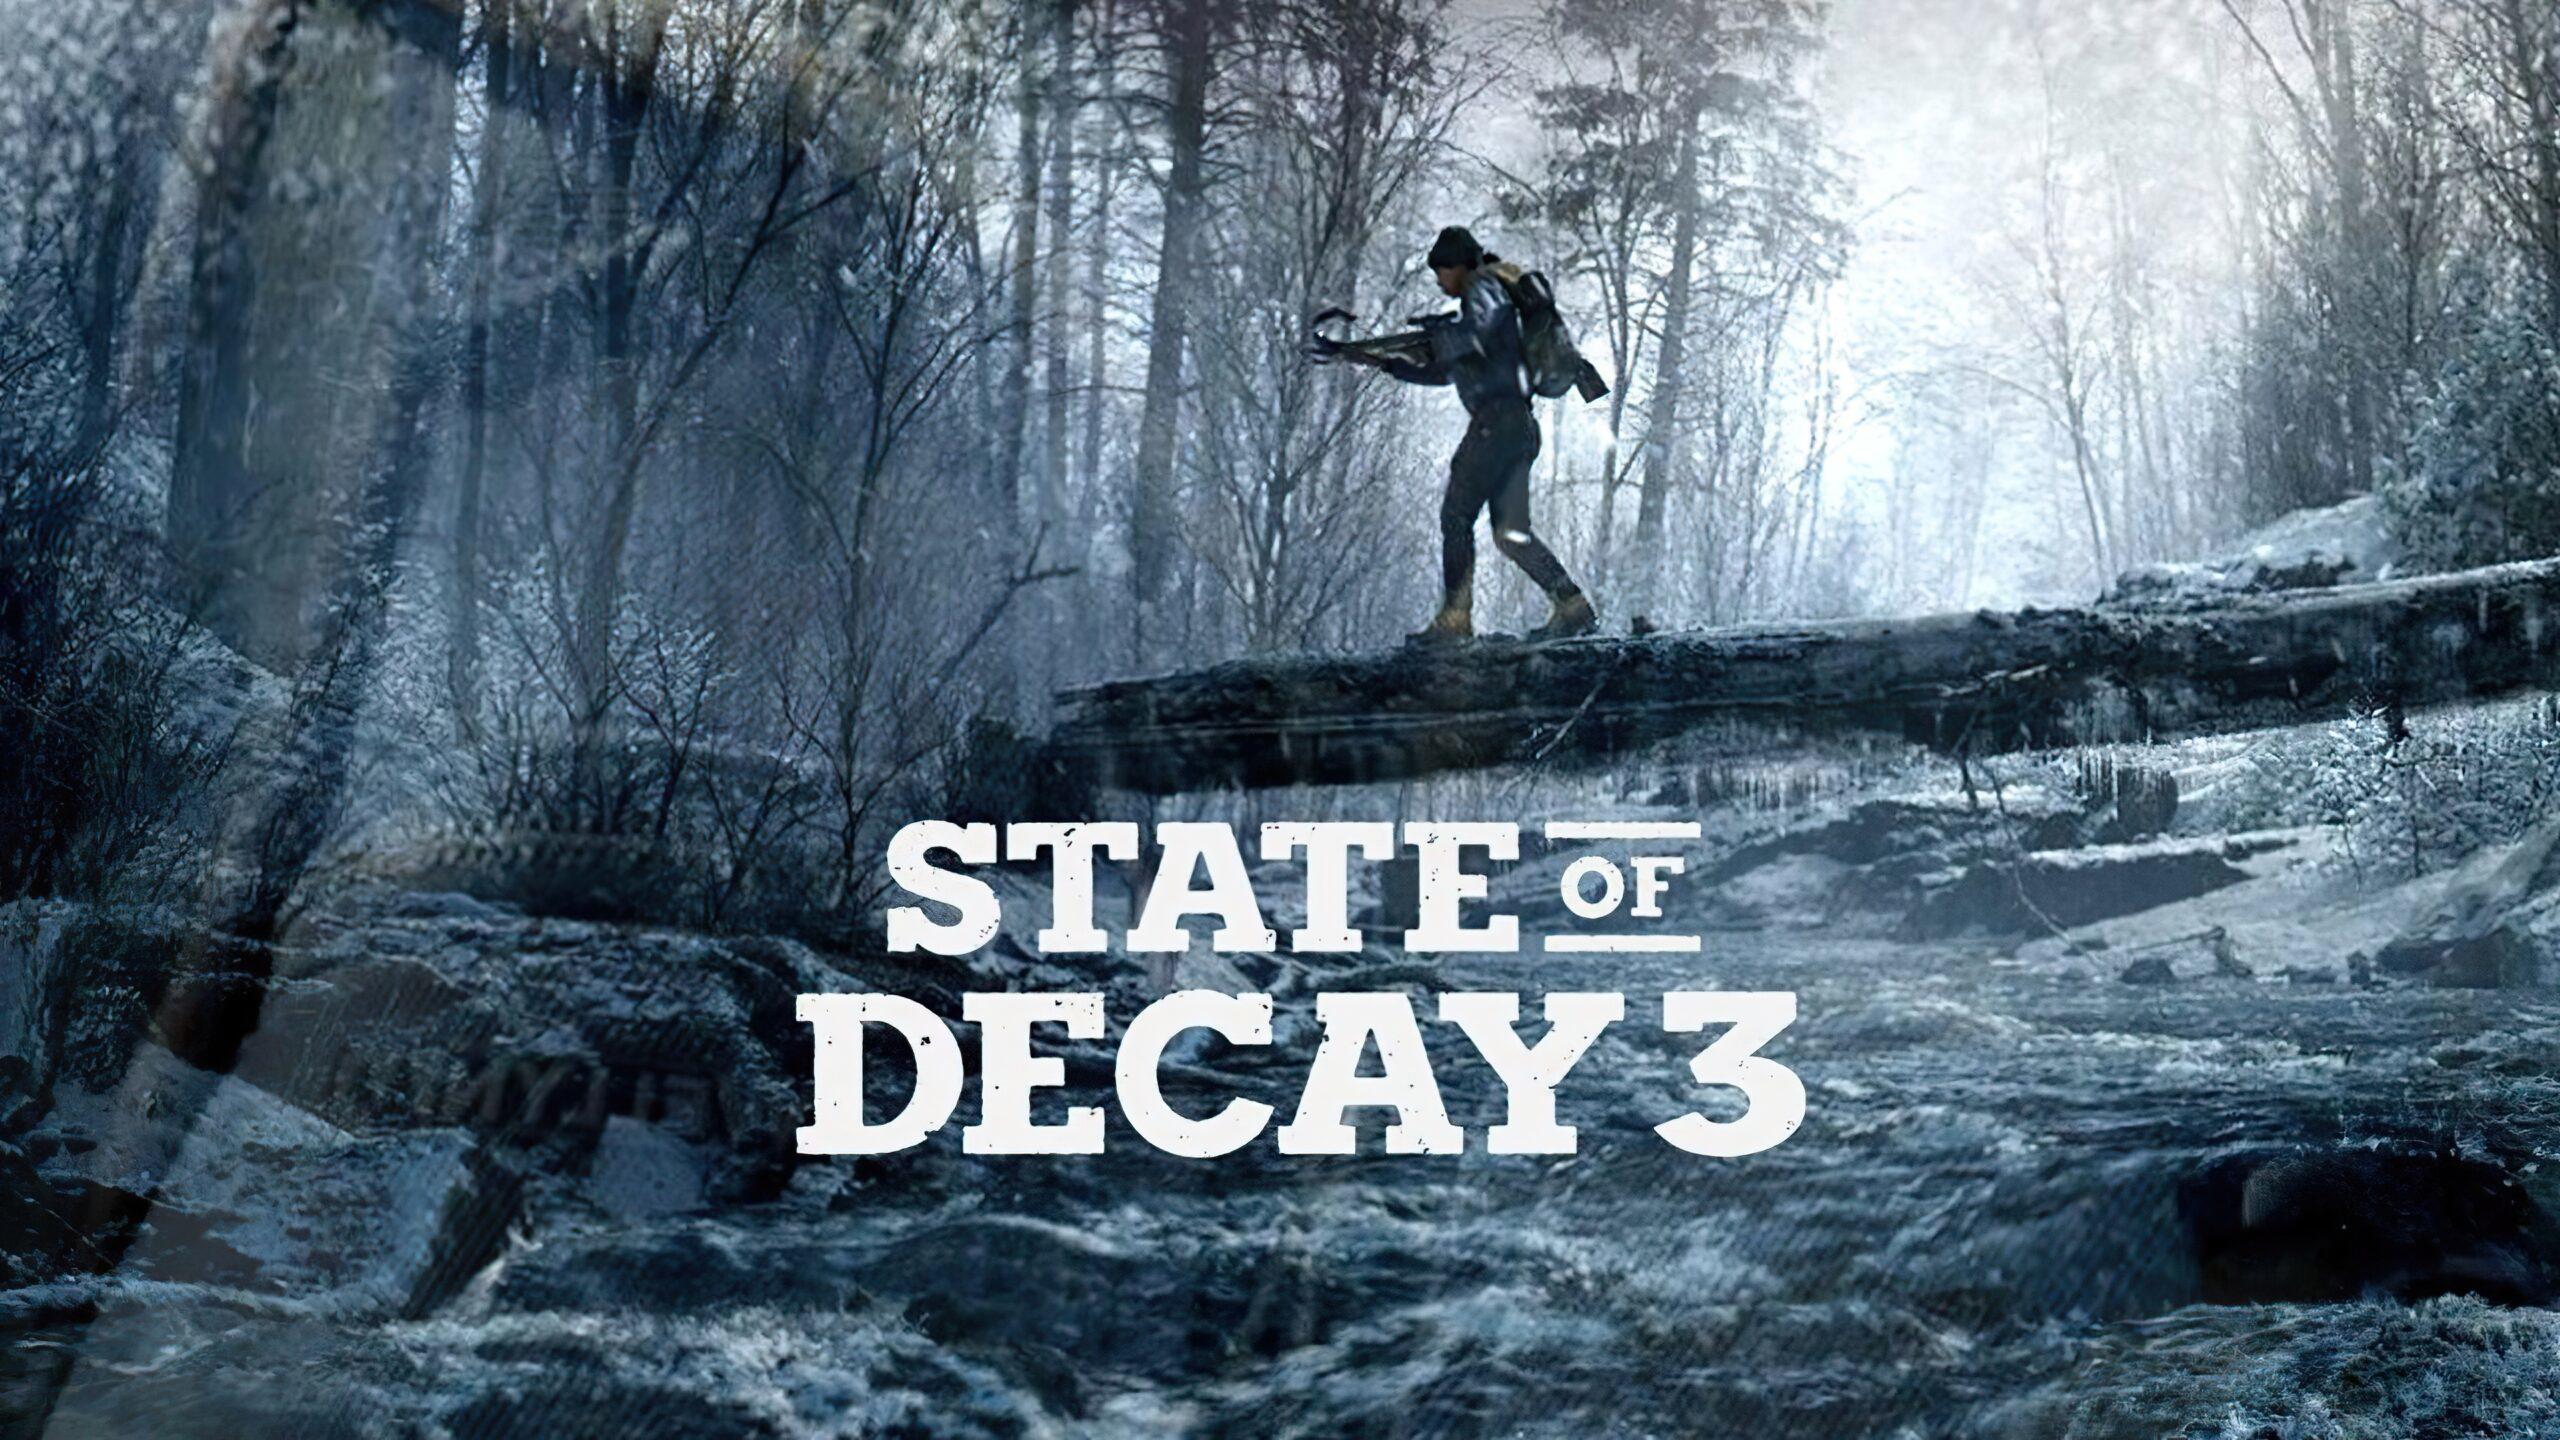 State of Decay 3 Planned for 2027 Release, It's Rumored - Insider